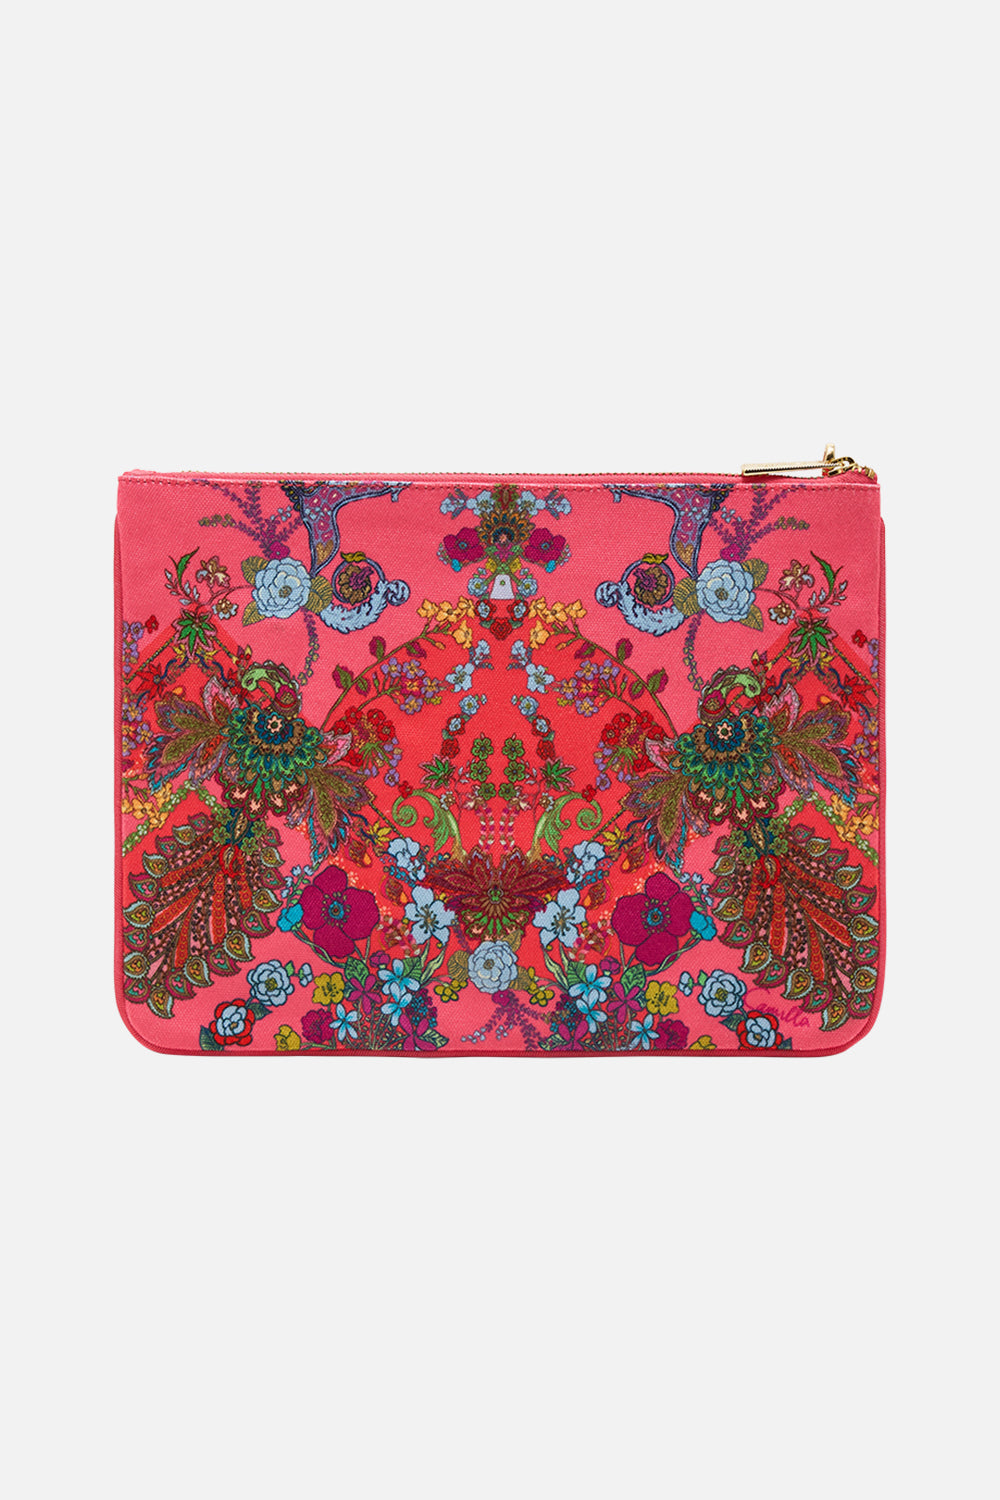 CAMILLA pink small canvas clutch in Windmills and Wildflowers